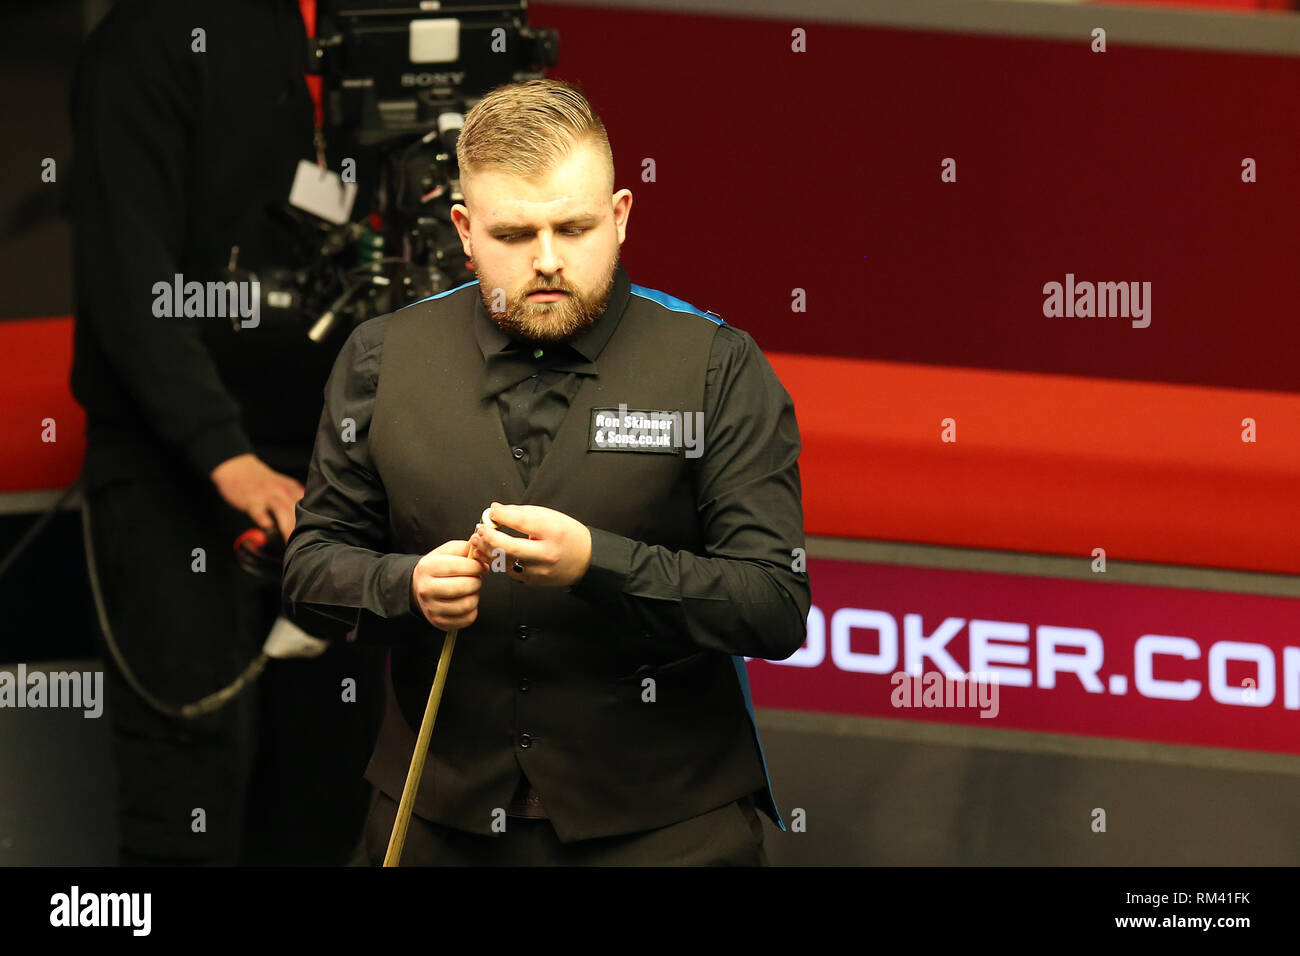 Cardiff, UK. 12th Feb, 2019. Jackson Page of Wales during his 1st round match against Zhao Xintong. Welsh Open snooker, day 2 at the Motorpoint Arena in Cardifft, South Wales on Tuesday 12th February 2019. pic by Credit: Andrew Orchard/Alamy Live News Stock Photo